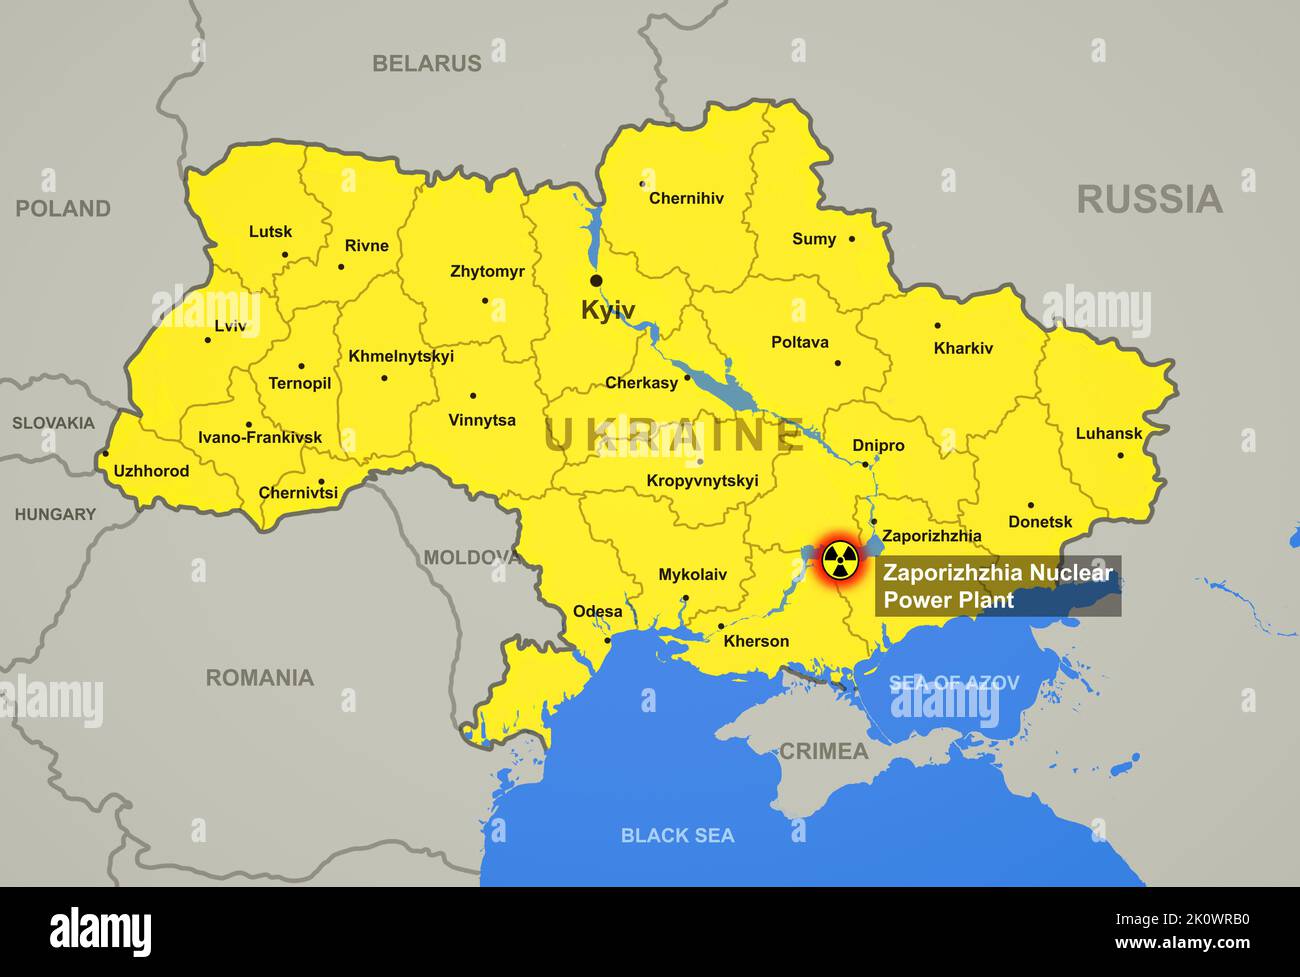 Zaporizhzhia Nuclear Power Plant on Ukraine map with cities and regions, hot spot of Russo-Ukrainian war. Border of countries on Europe map. Zaporizhz Stock Photo